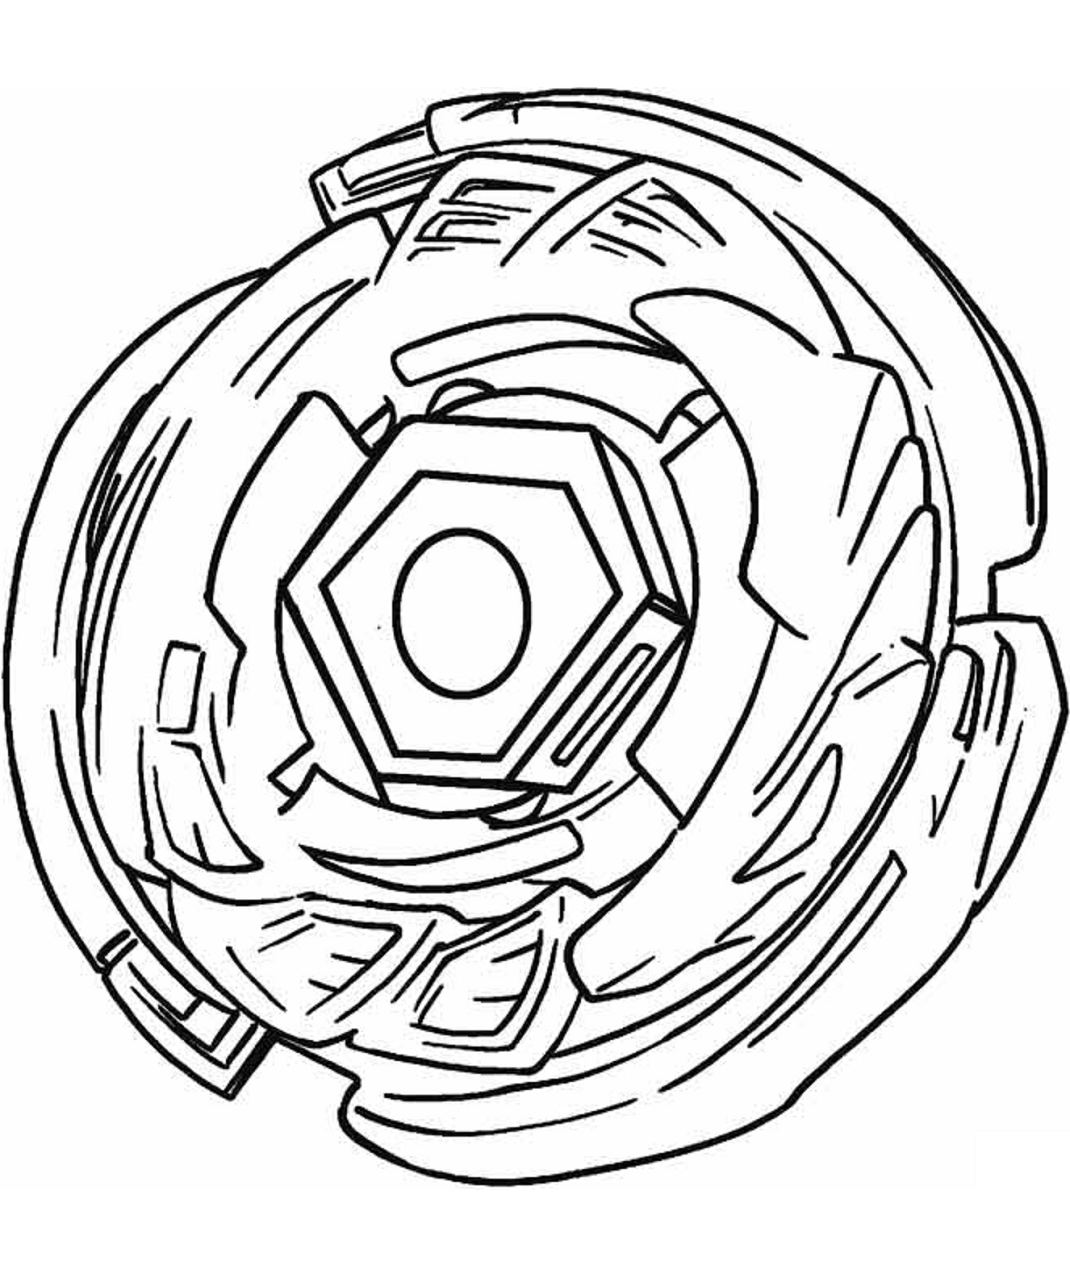 A Beyblade Coloring Page - Free Printable Coloring Pages for Kids